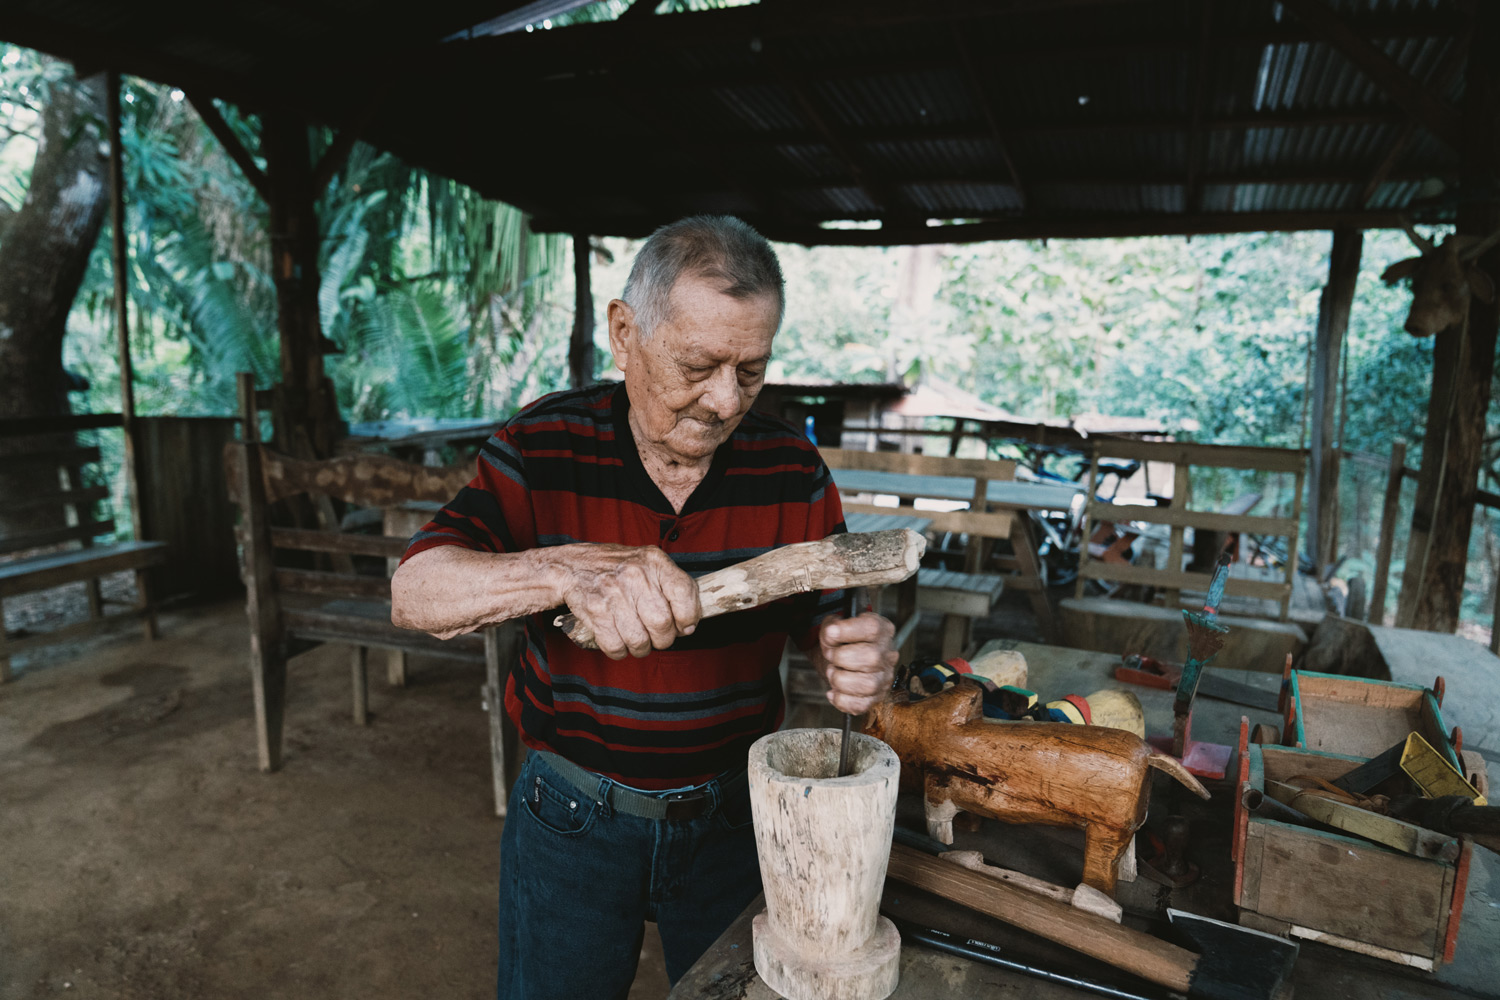 A carpenter and farmer for much of his life, demonstrates his wood working skills